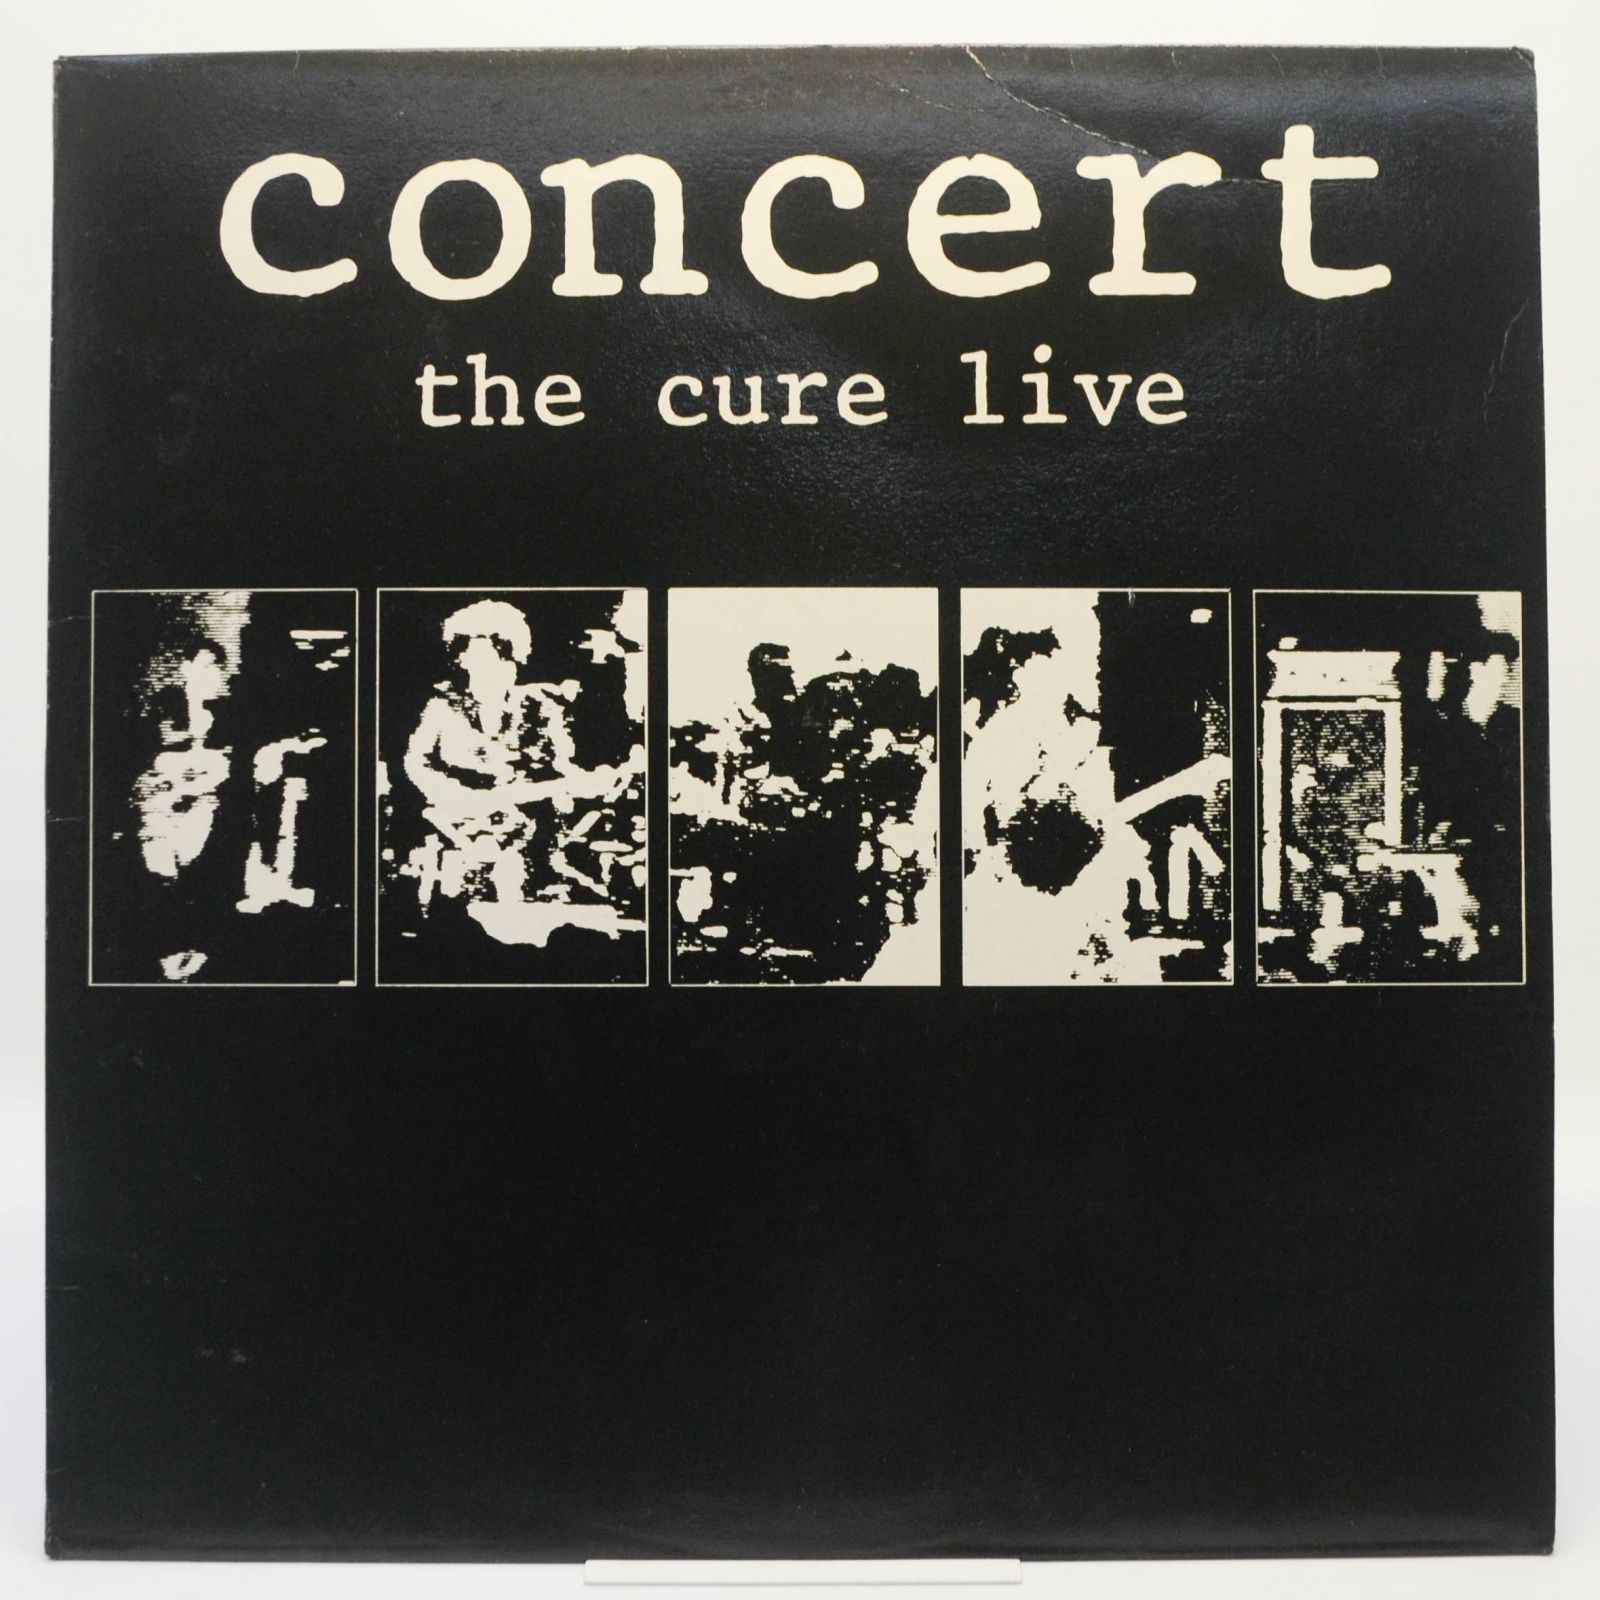 Concert - The Cure Live, 1984